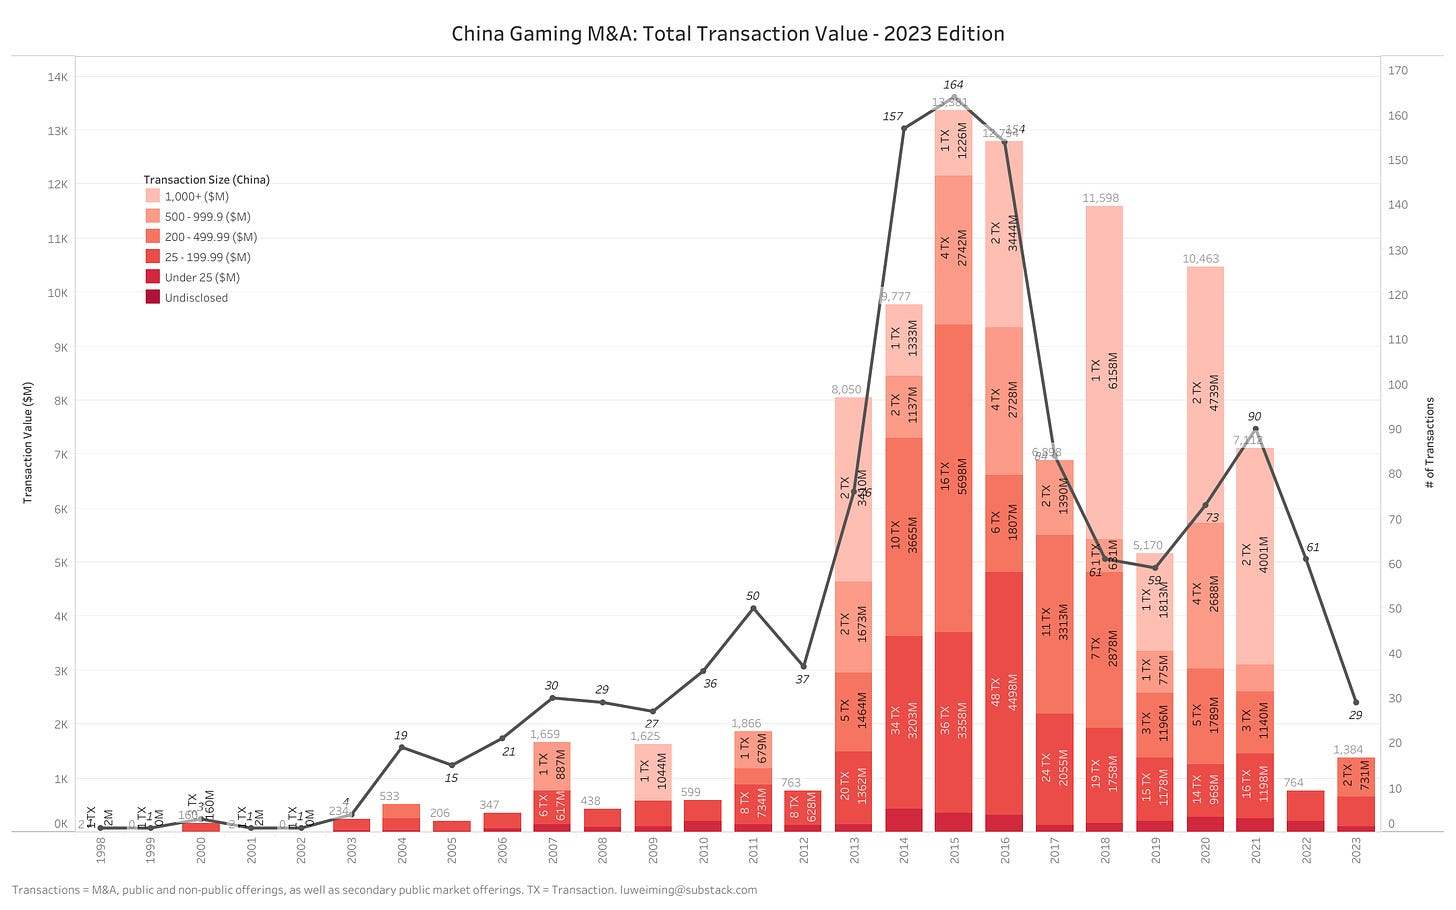 China Gaming M&A: Total Transaction Value - 2023 Edition